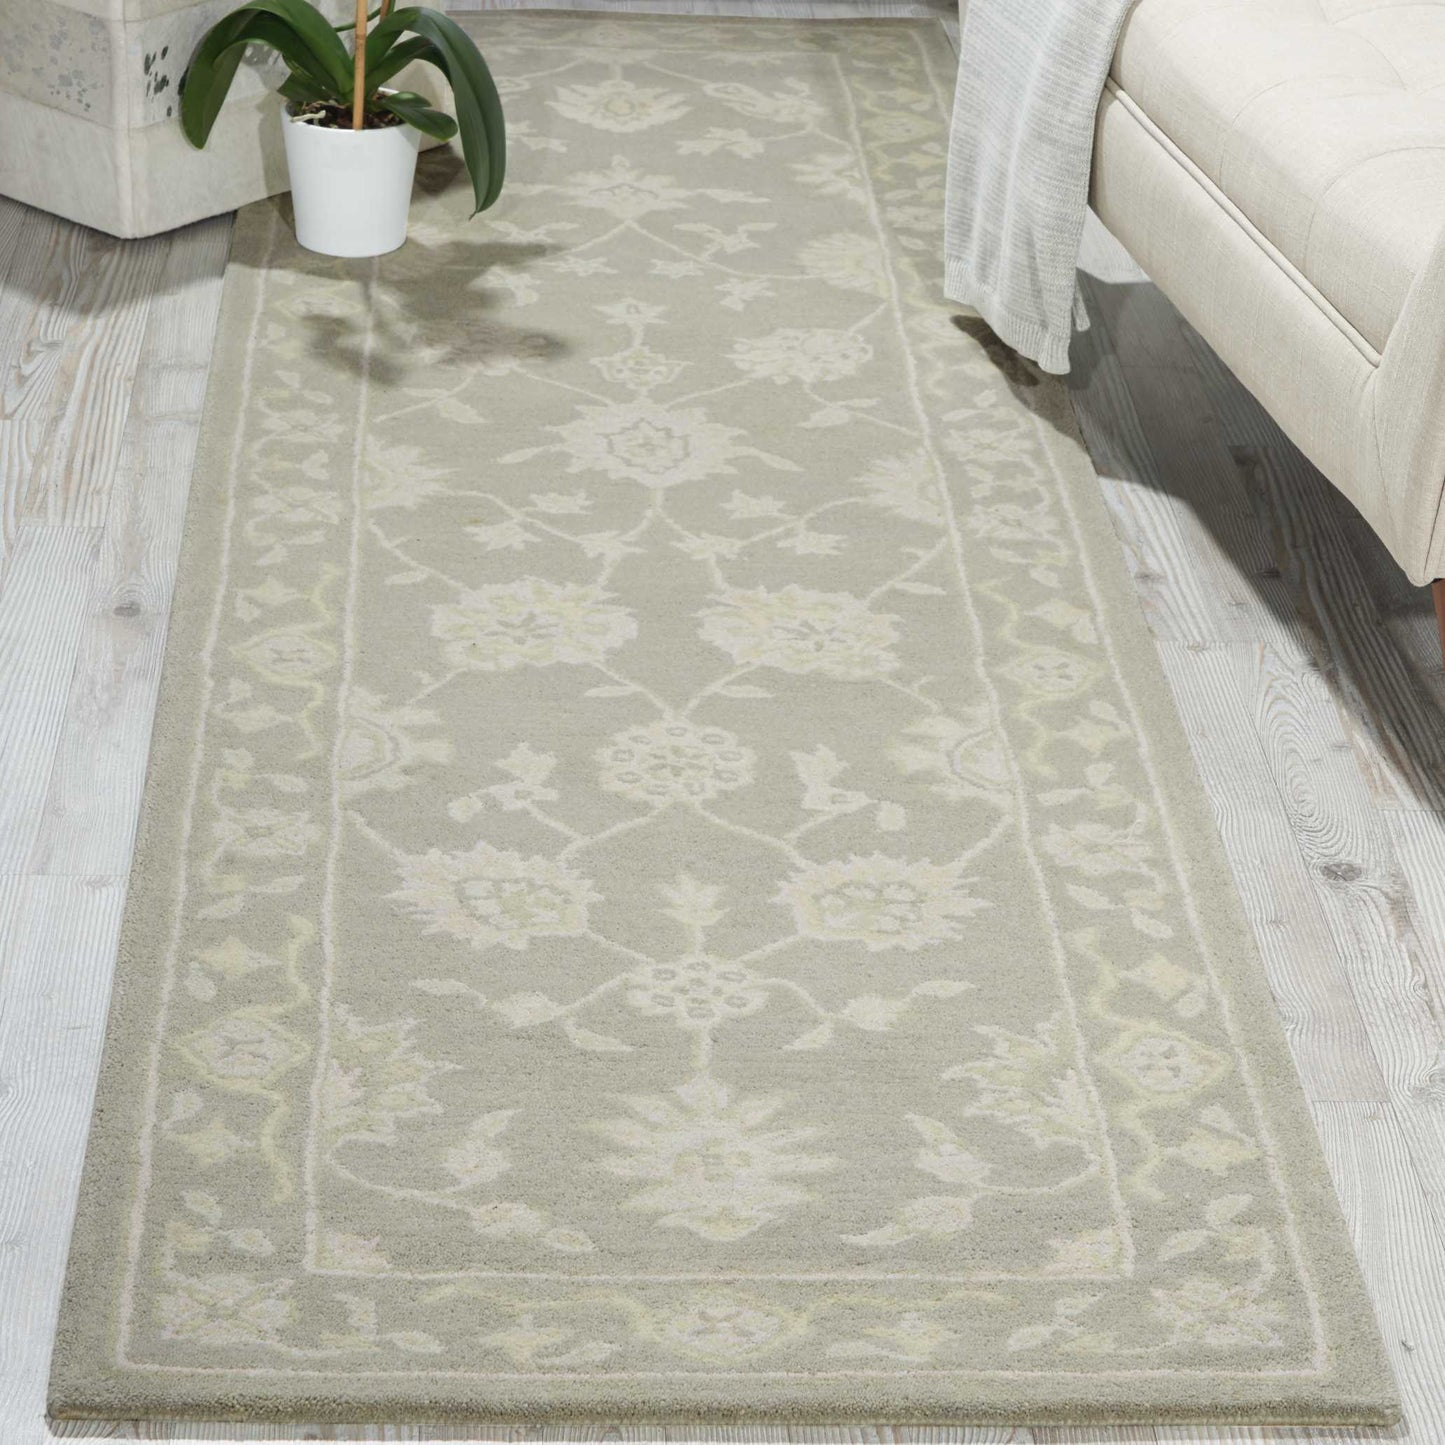 Nourison Home Zephyr ZEP02 Light Taupe  Traditional Tufted Rug